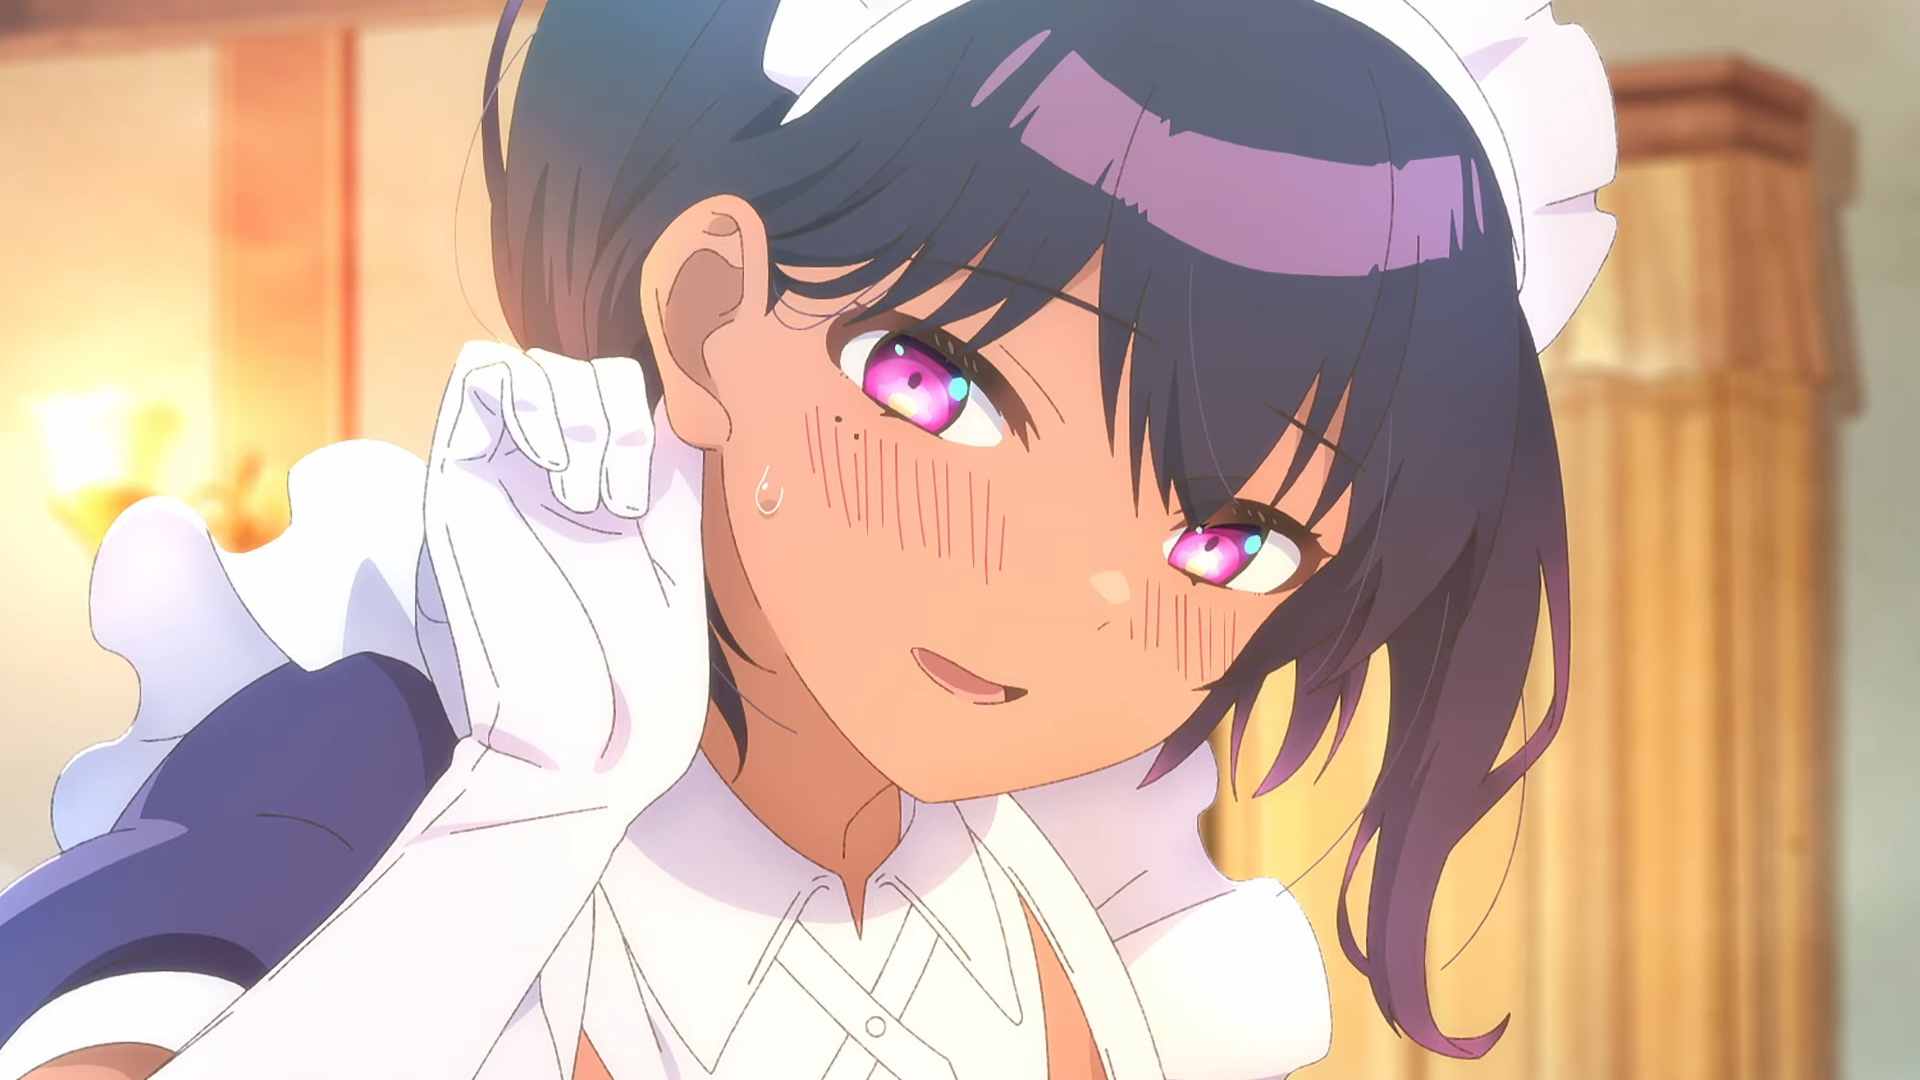 The Maid I Hired Recently Is Mysterious Anime Adaptation Set for July 2022  - Anime Corner